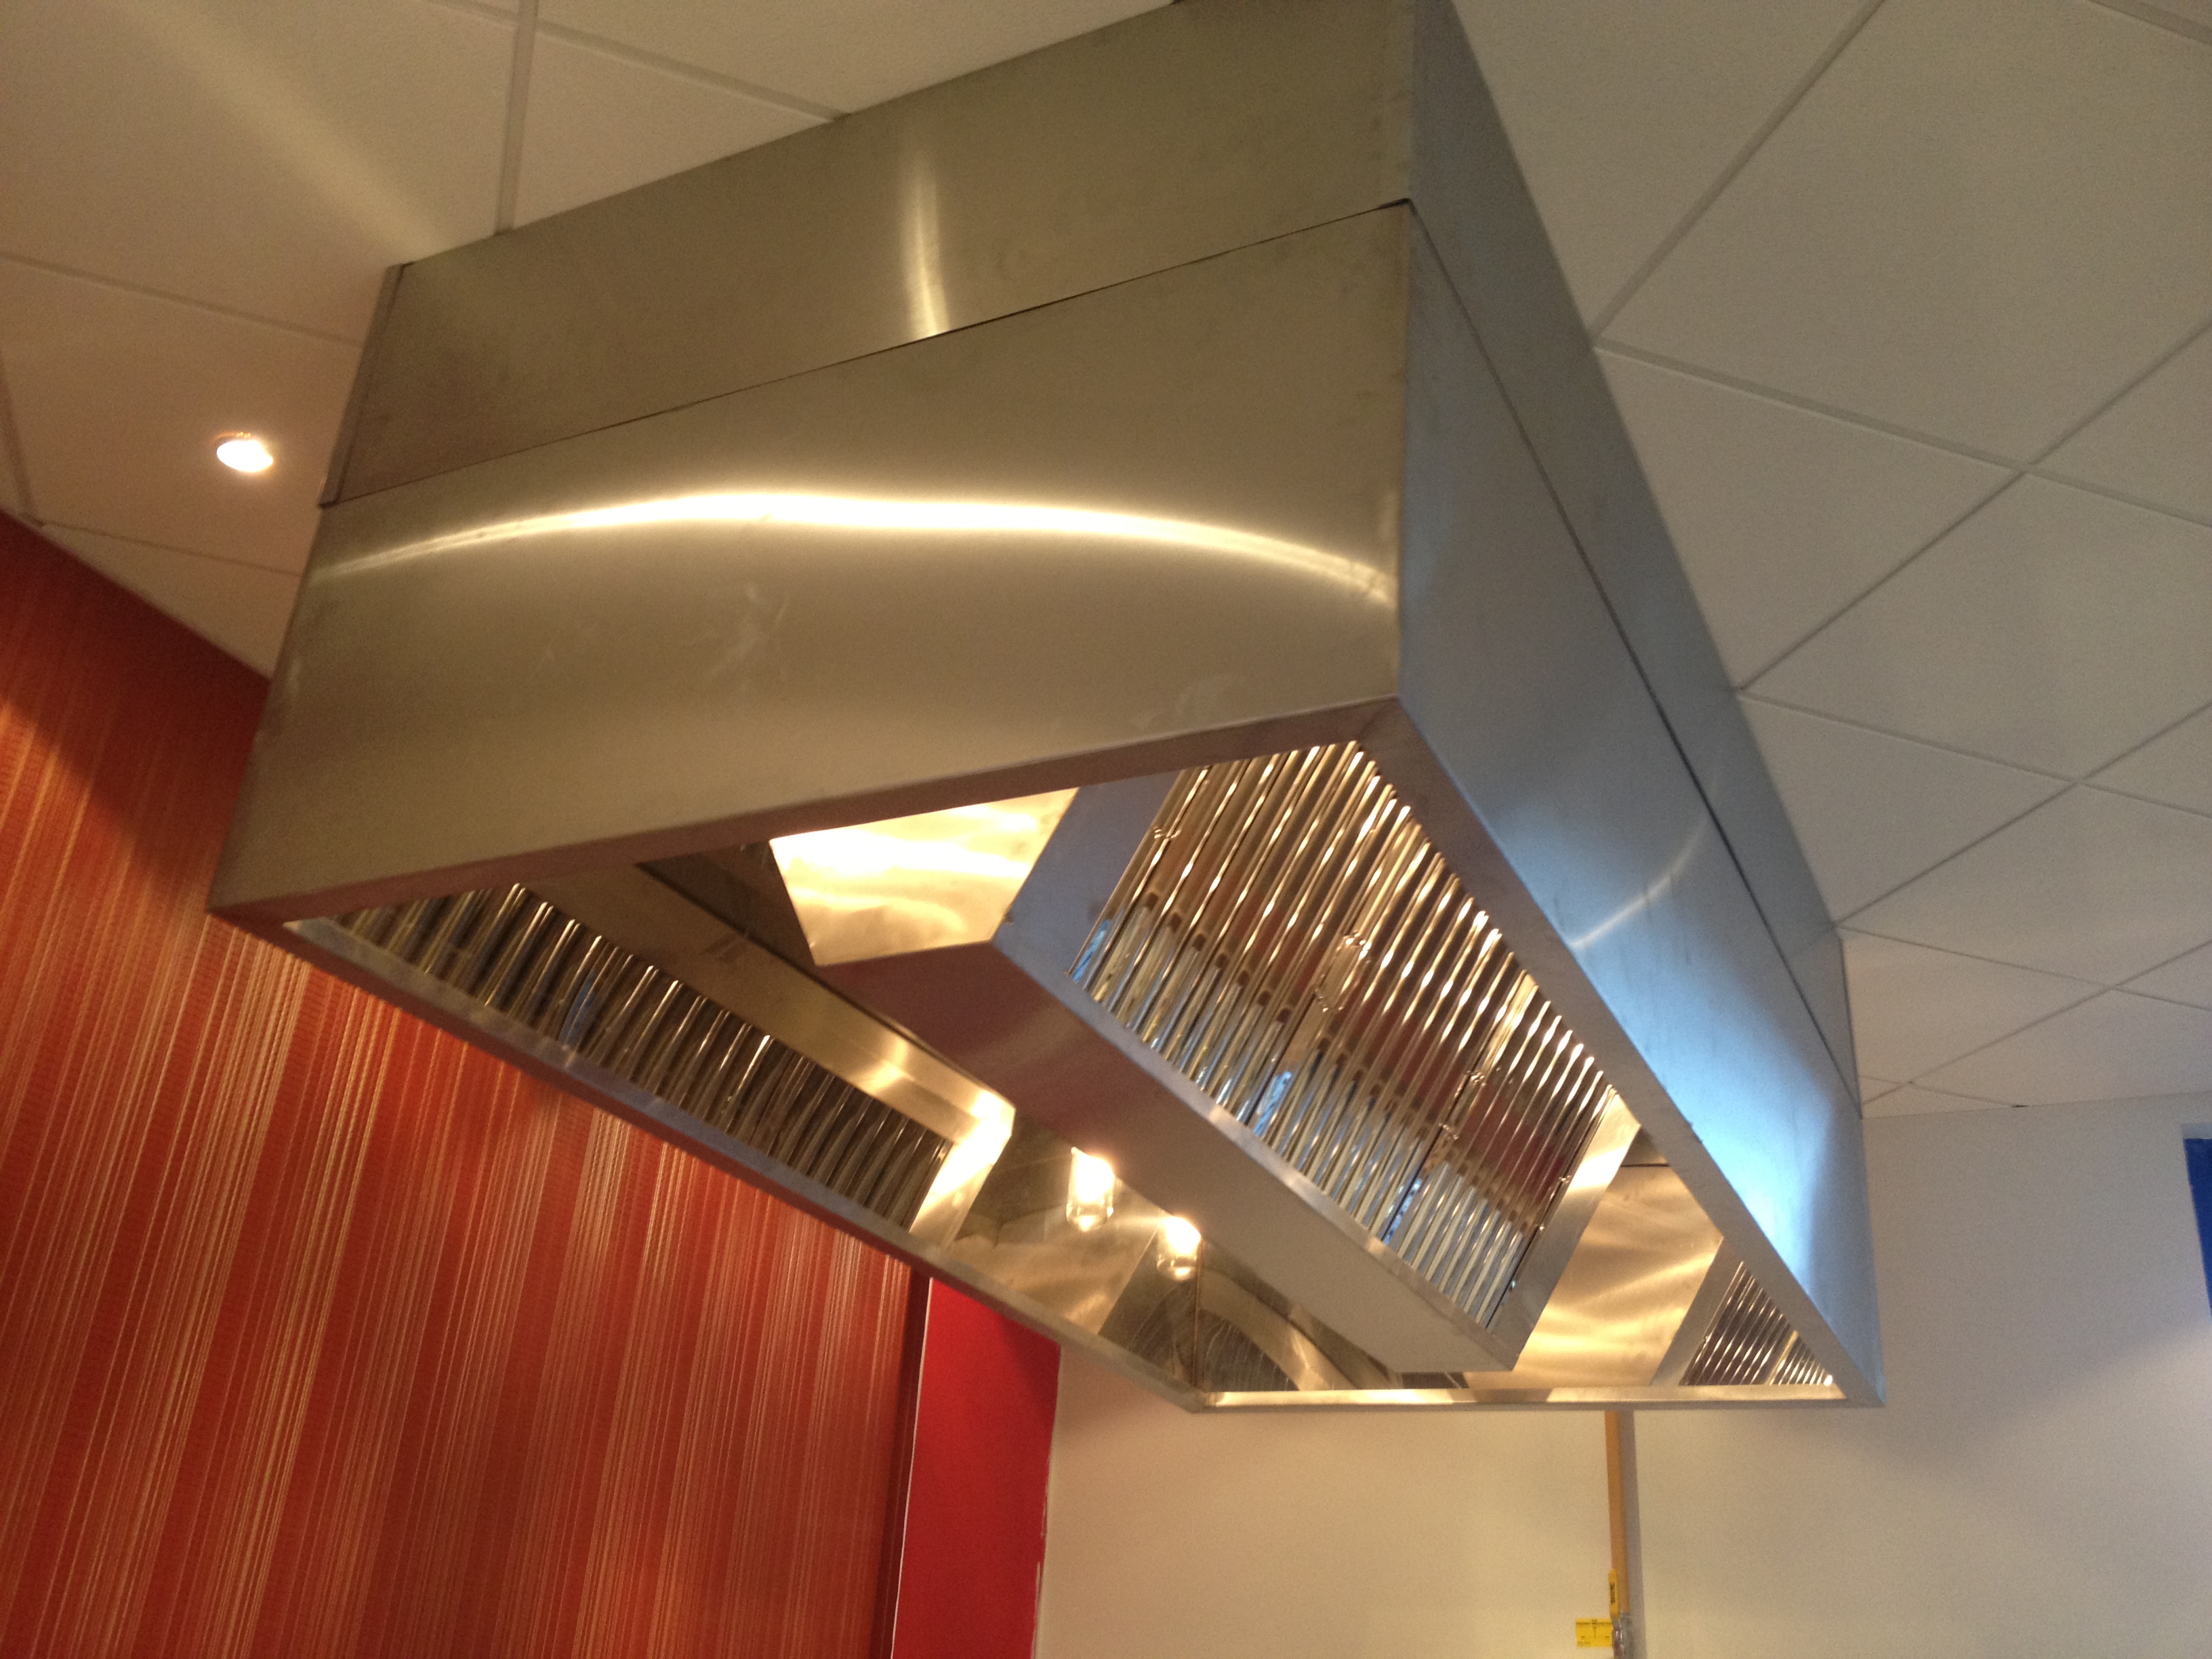 Stainless Steel Island Canopy